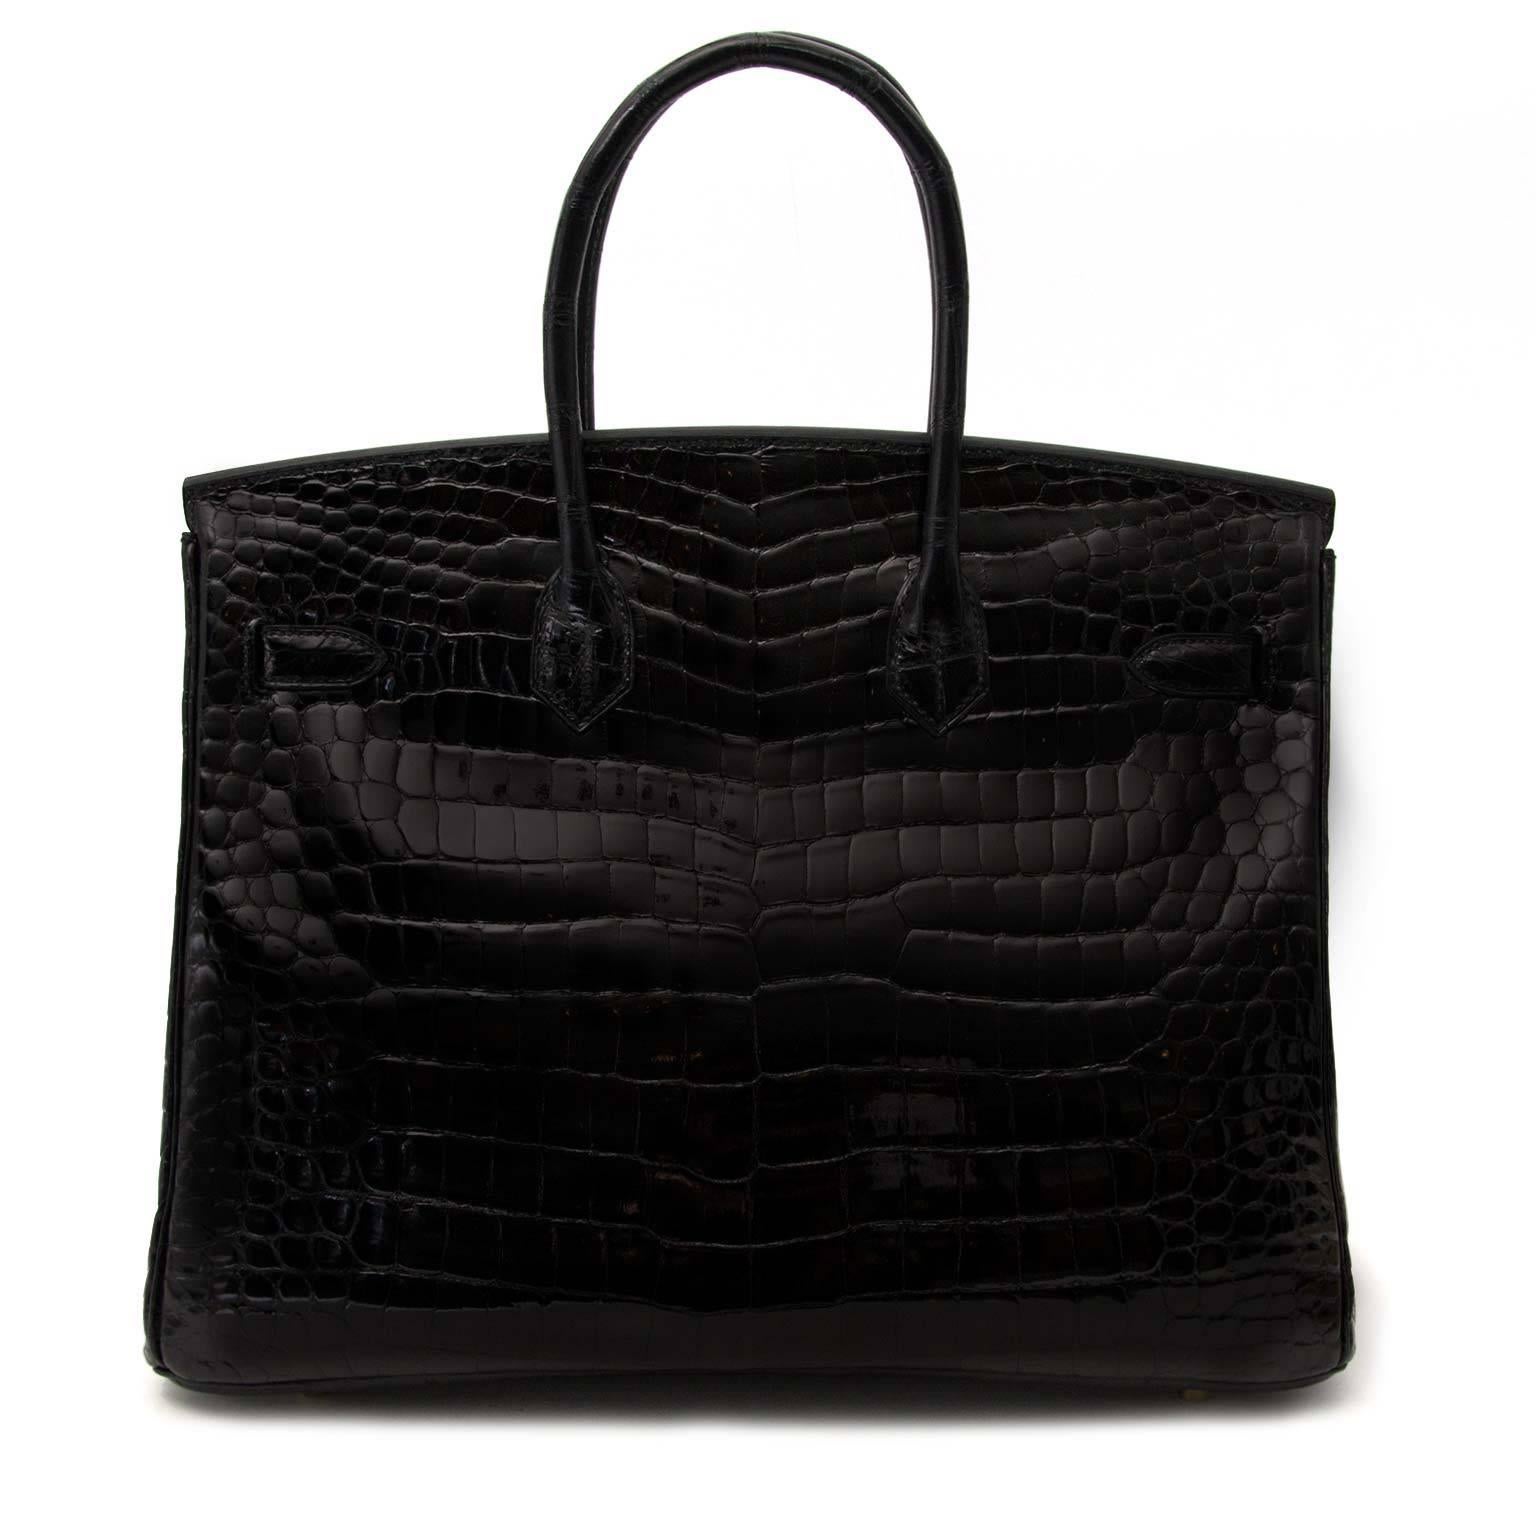 Brand new

Hermès Birkin 35cm Crocodile Porosus Black GHW Interior Rouge H

Only for VIP Clientèle

There are endless shades of grey and many different shades of reds but there can only be one true winner and that's black in combination with this